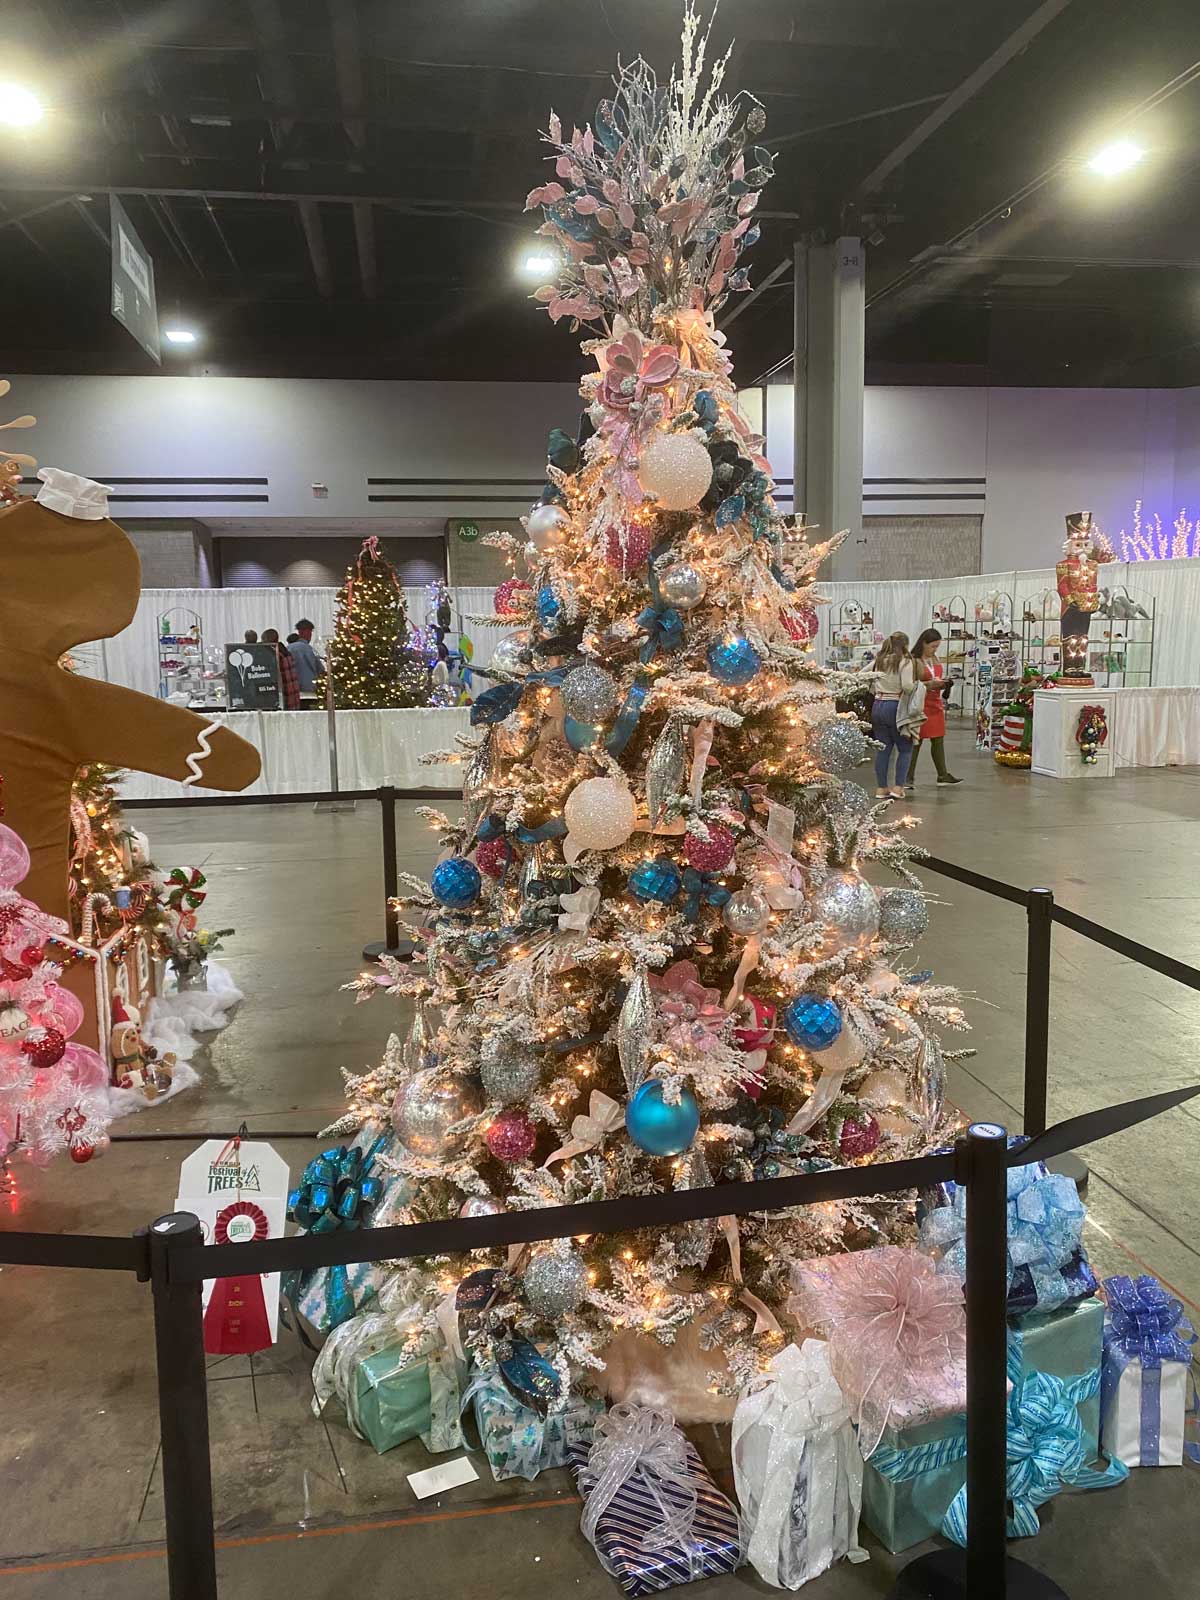 Best In Show - Large Tree<br>“Tourmaline Ice” - Wellcare/Ambetter by Ella Romney